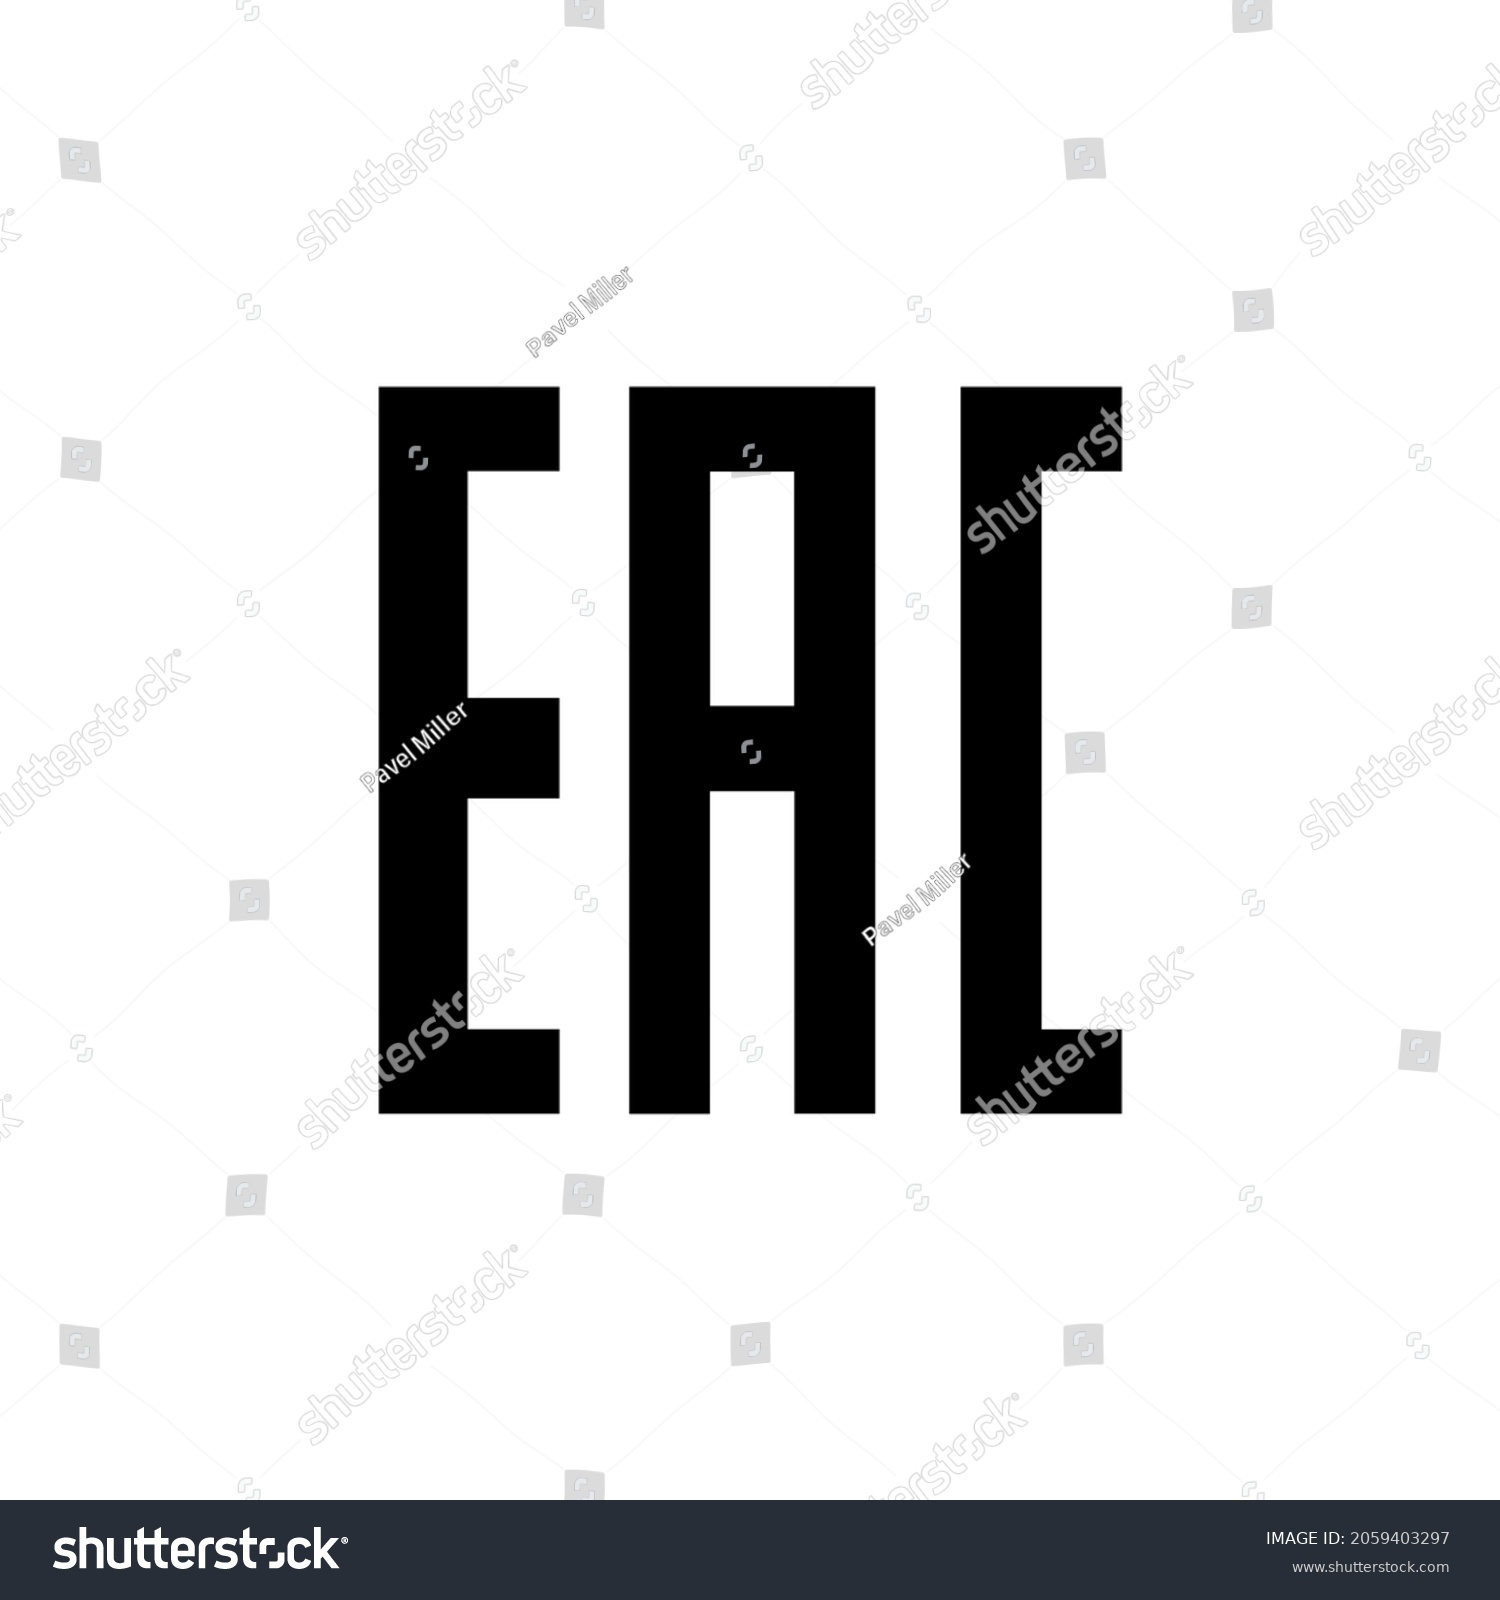 Disconnected eac client. EAC знак. Символ EAC gif. Маркировка ЕАС вектор. Знак ЕАС Россия.